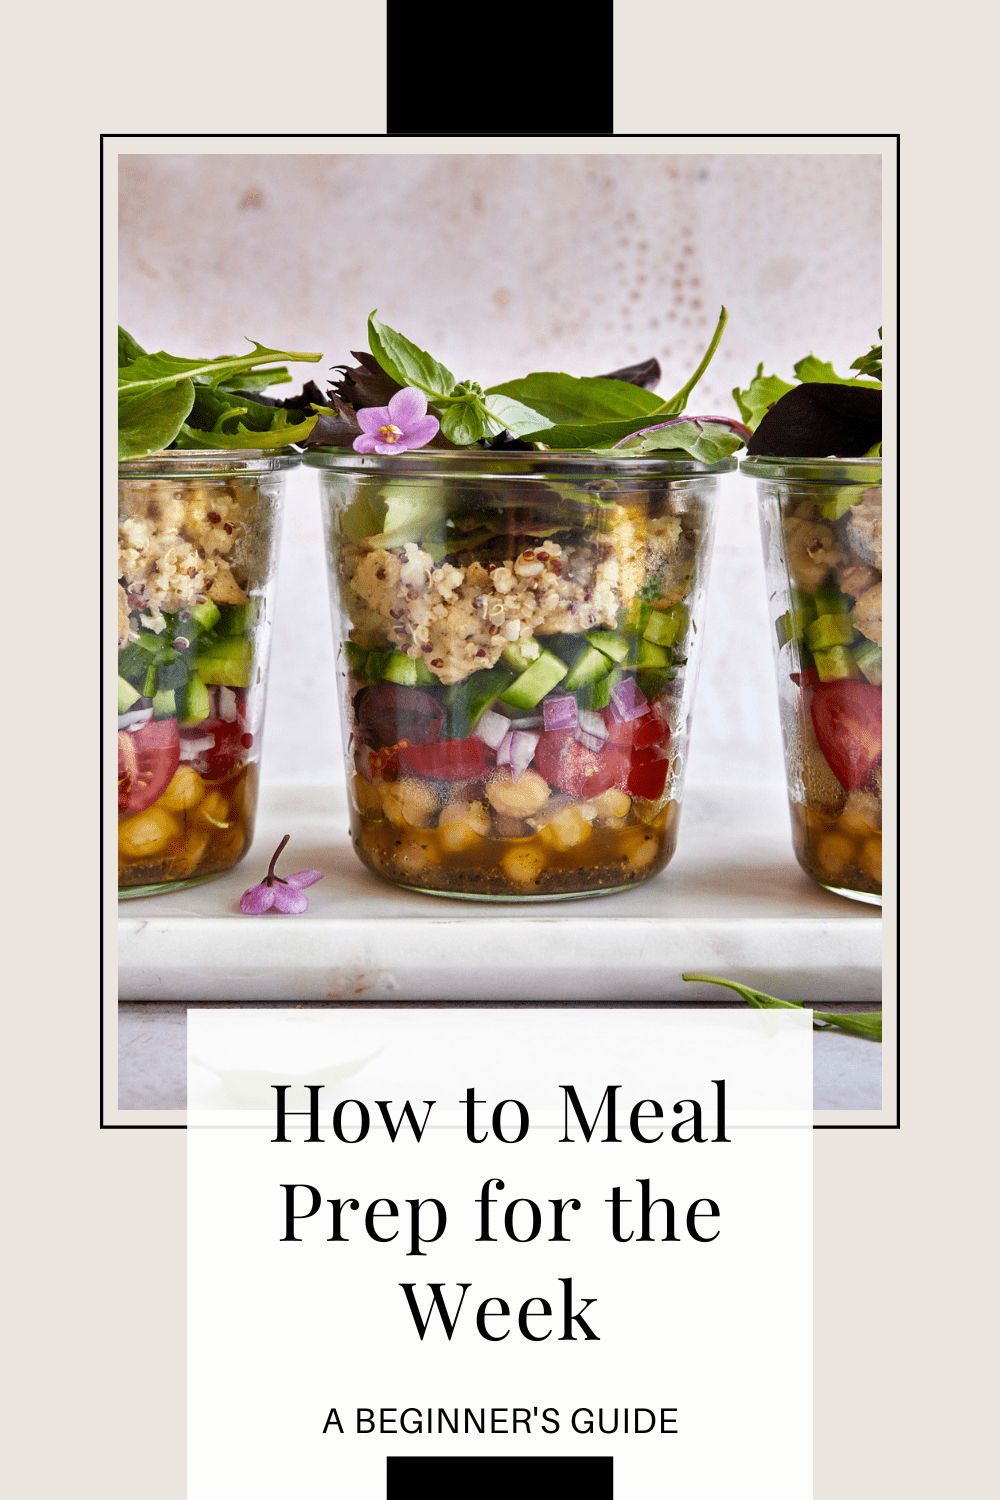 How to Meal Prep for the Week: A Beginner's Guide - Food Dolls